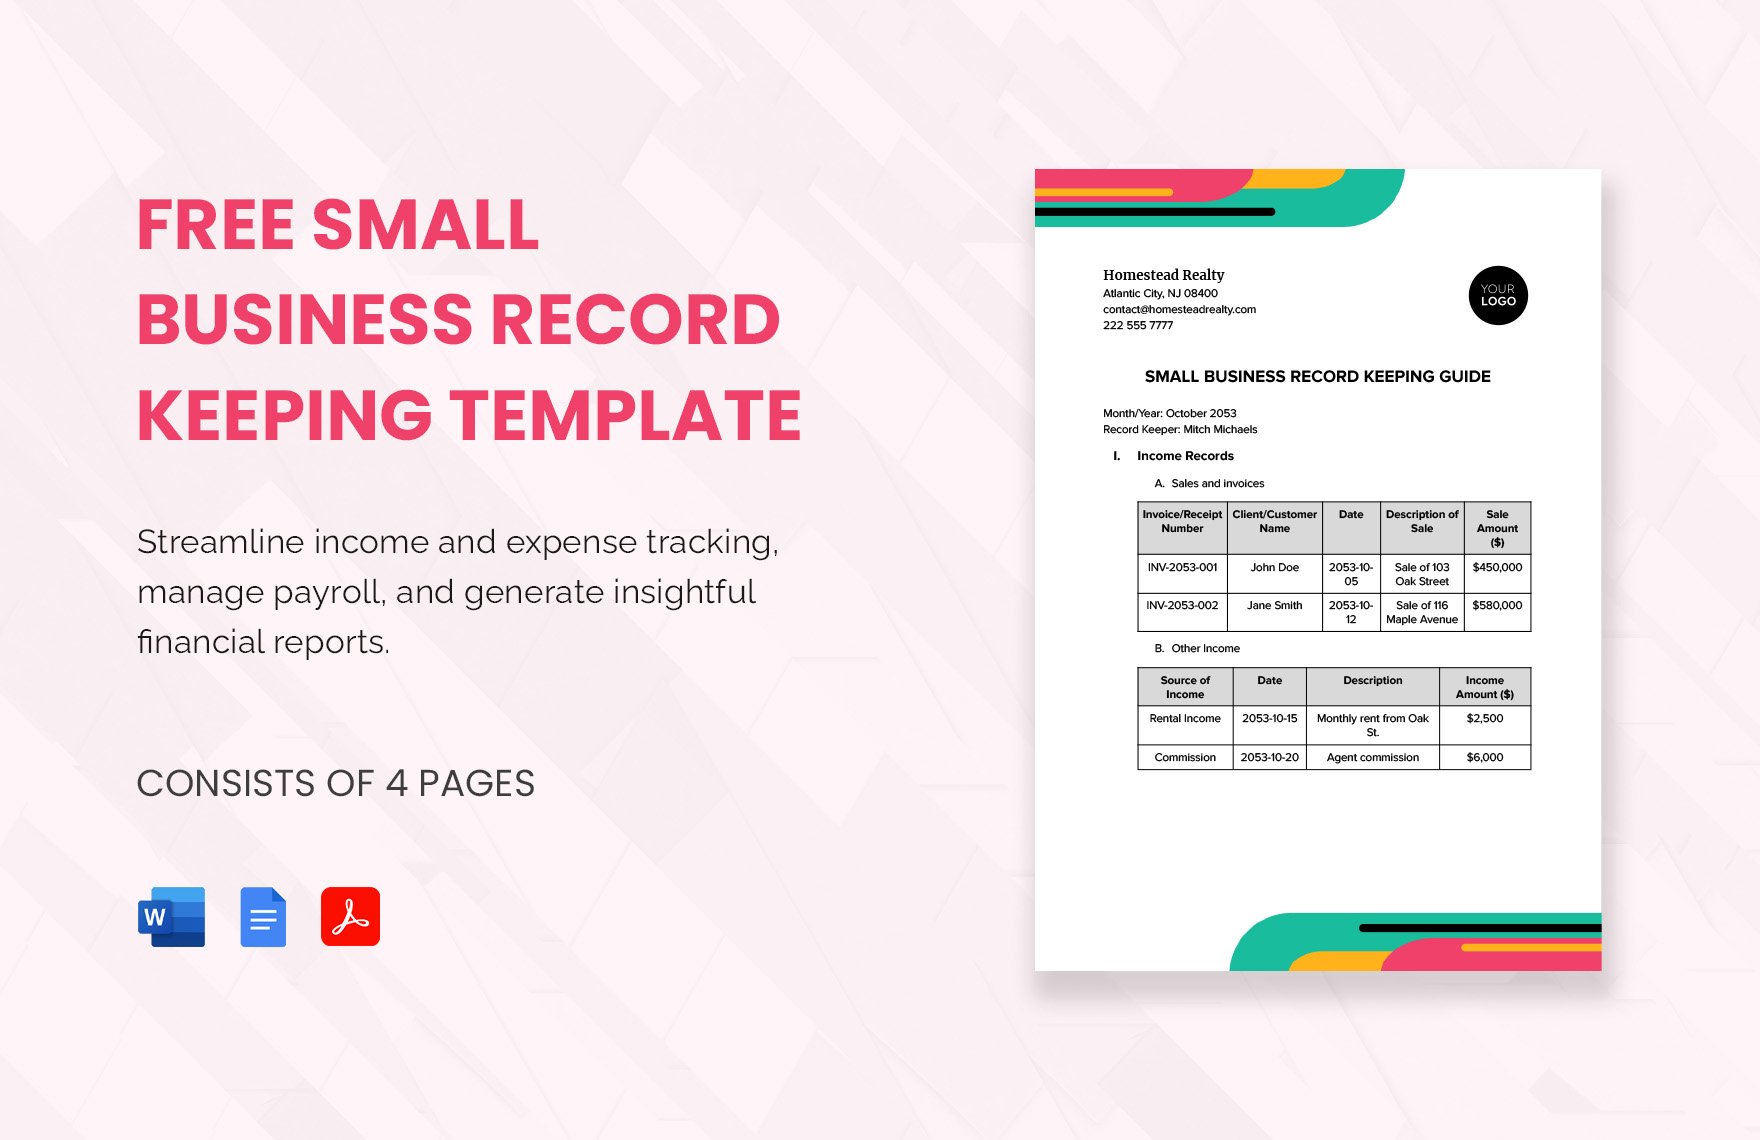 Free Small Business Record Keeping Template